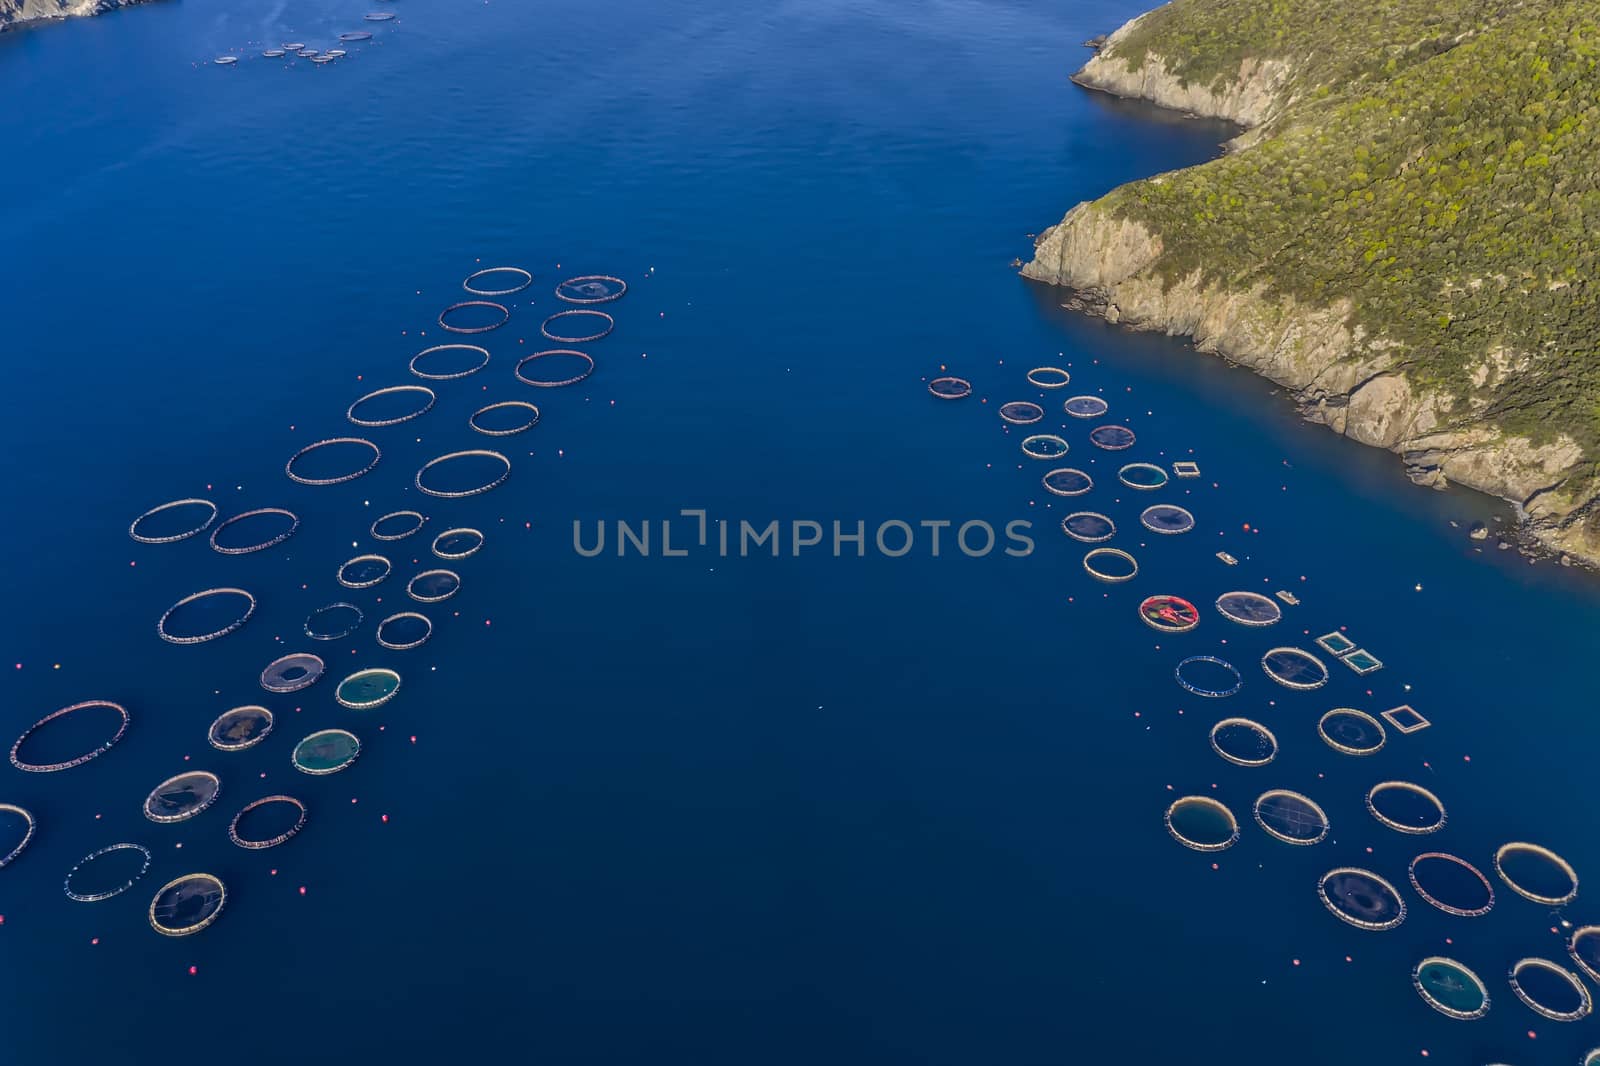 Fish farm with floating cages in Chalkidiki, Greece by ververidis